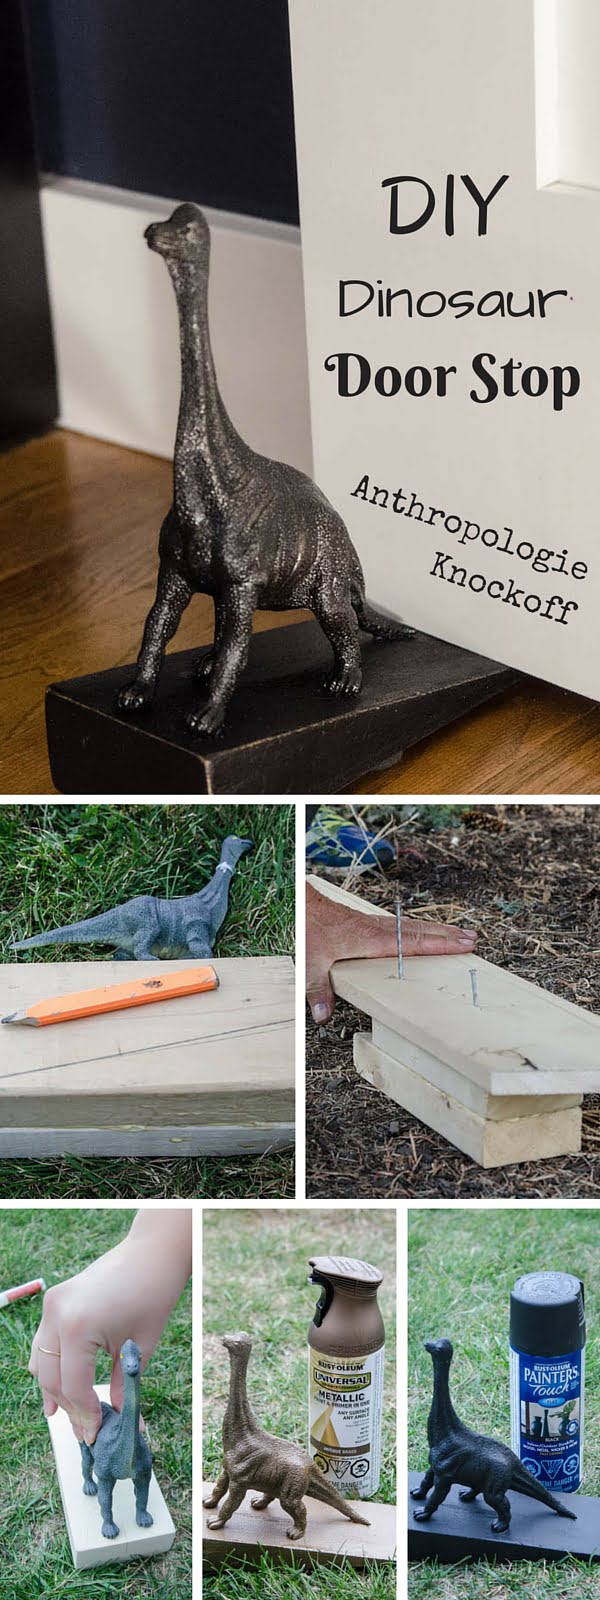 Check out the tutorial:  Anthropologie Dinosaur Door Stop Knockoff  